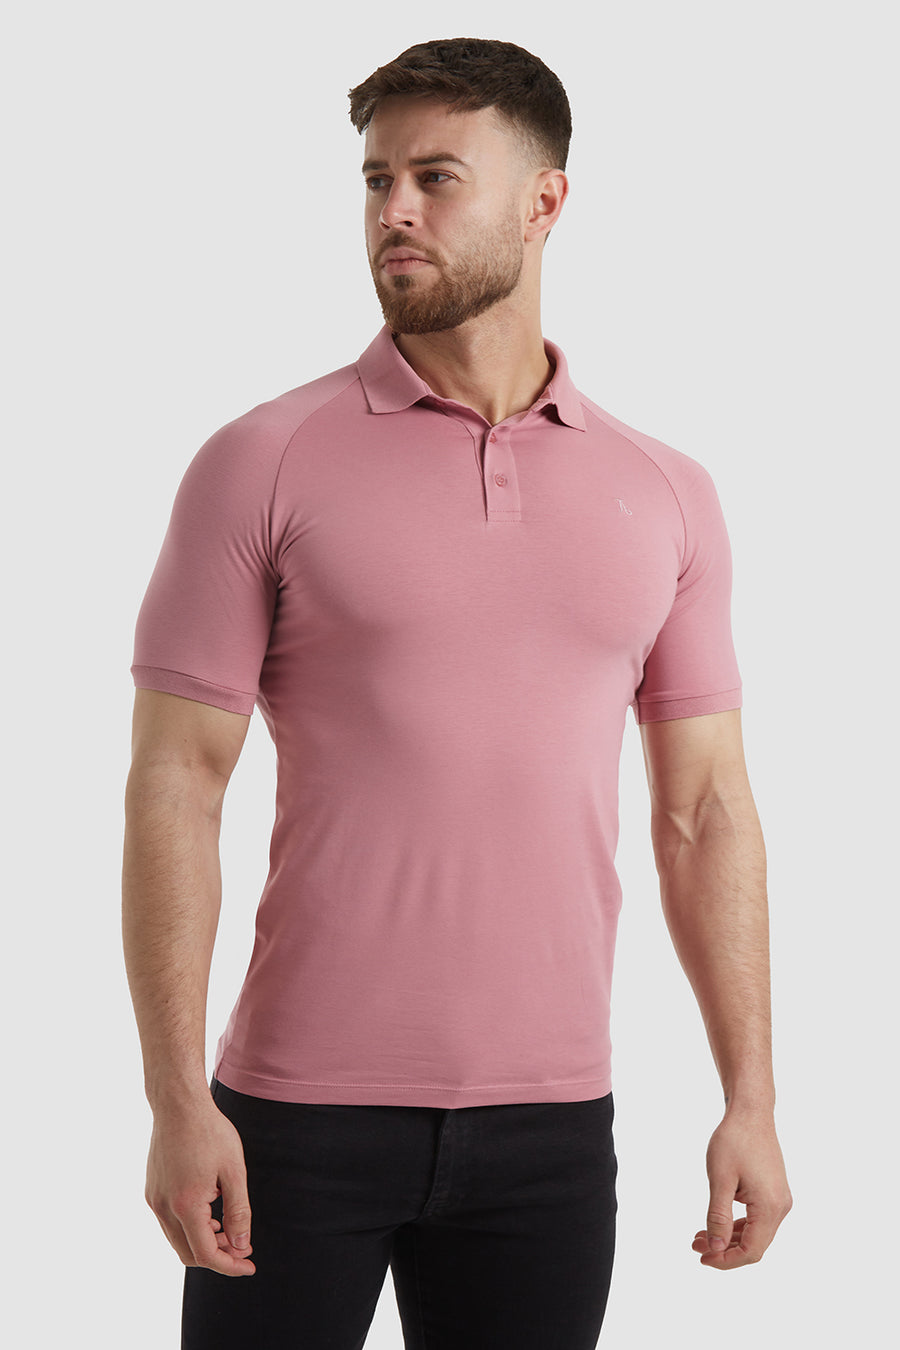 Athletic Fit Polo Shirt In Vintage Pink - TAILORED ATHLETE - USA